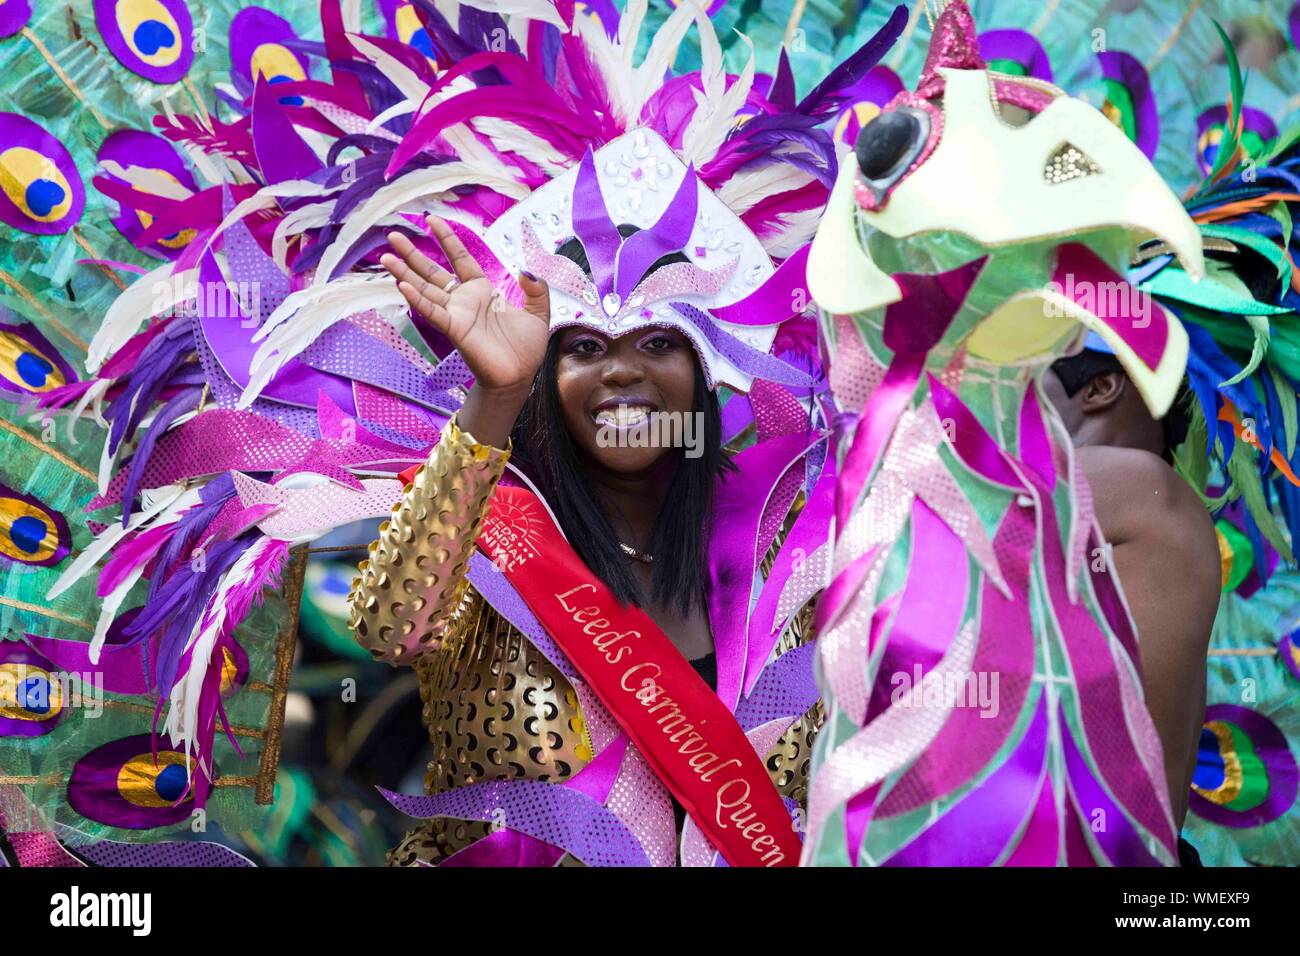 Leeds West Indian Carnival 2019 The Leeds Carnival, also called the Leeds West Indian Carnival or the Chapeltown Carnival, is one of the longest runni Stock Photo